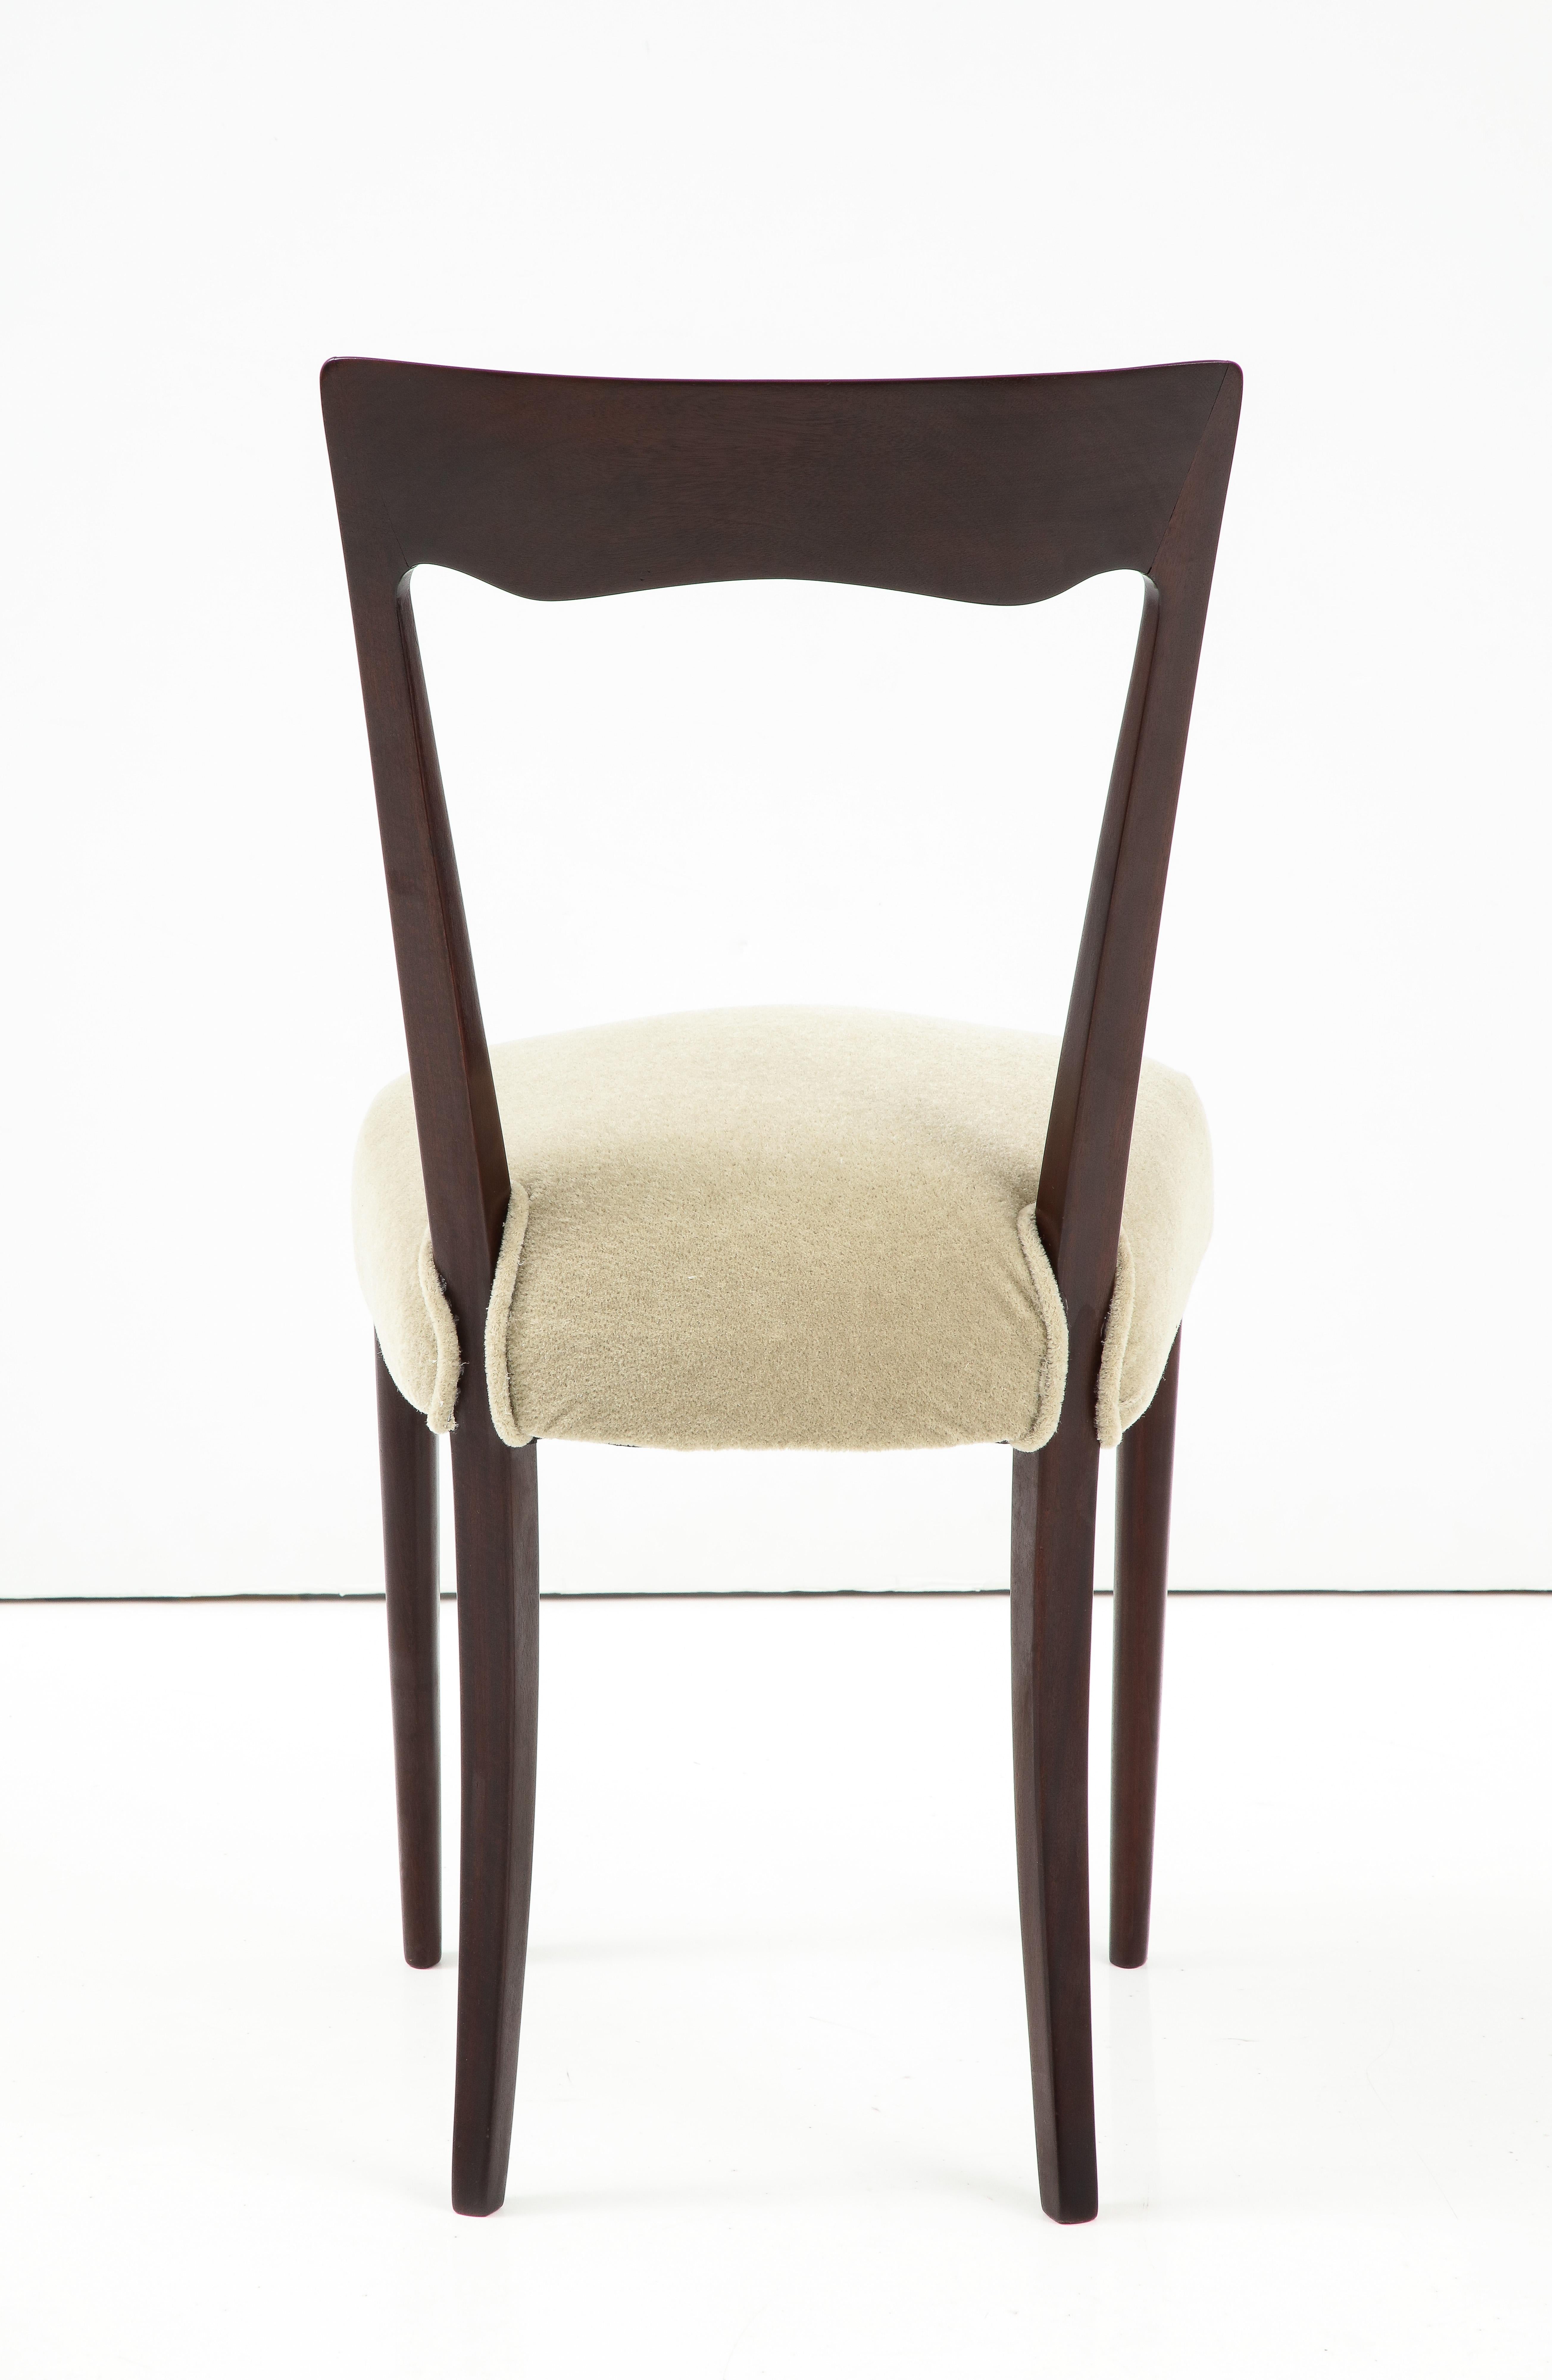 Mid-Century Modern 1950's Modernist Italian Dining Chairs In Mohair Upholstery